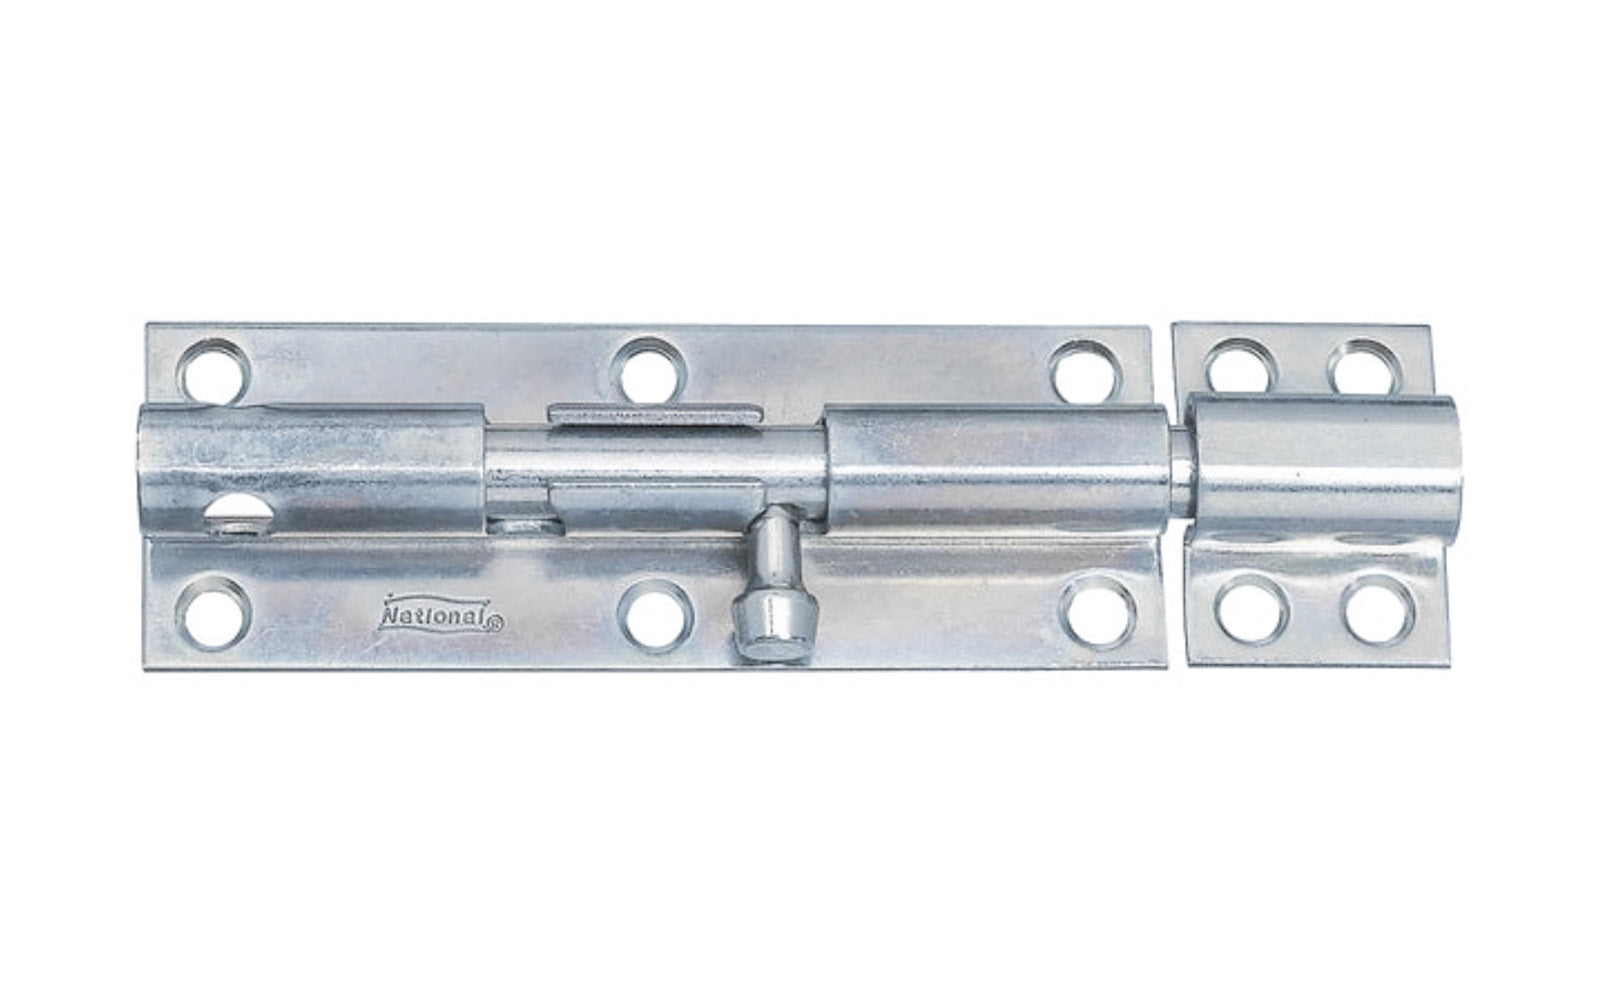 This 6" Zinc-Plated Heavy Duty Barrel Bolt is designed for security applications such as on doors, gates, storage sheds, & utility cabinets, etc. Can be secured with a padlock. Use on vertical, horizontal, left or right hand applications. 6" width x 1-5/8" height. National Hardware Model No. N162-388. 038613162389